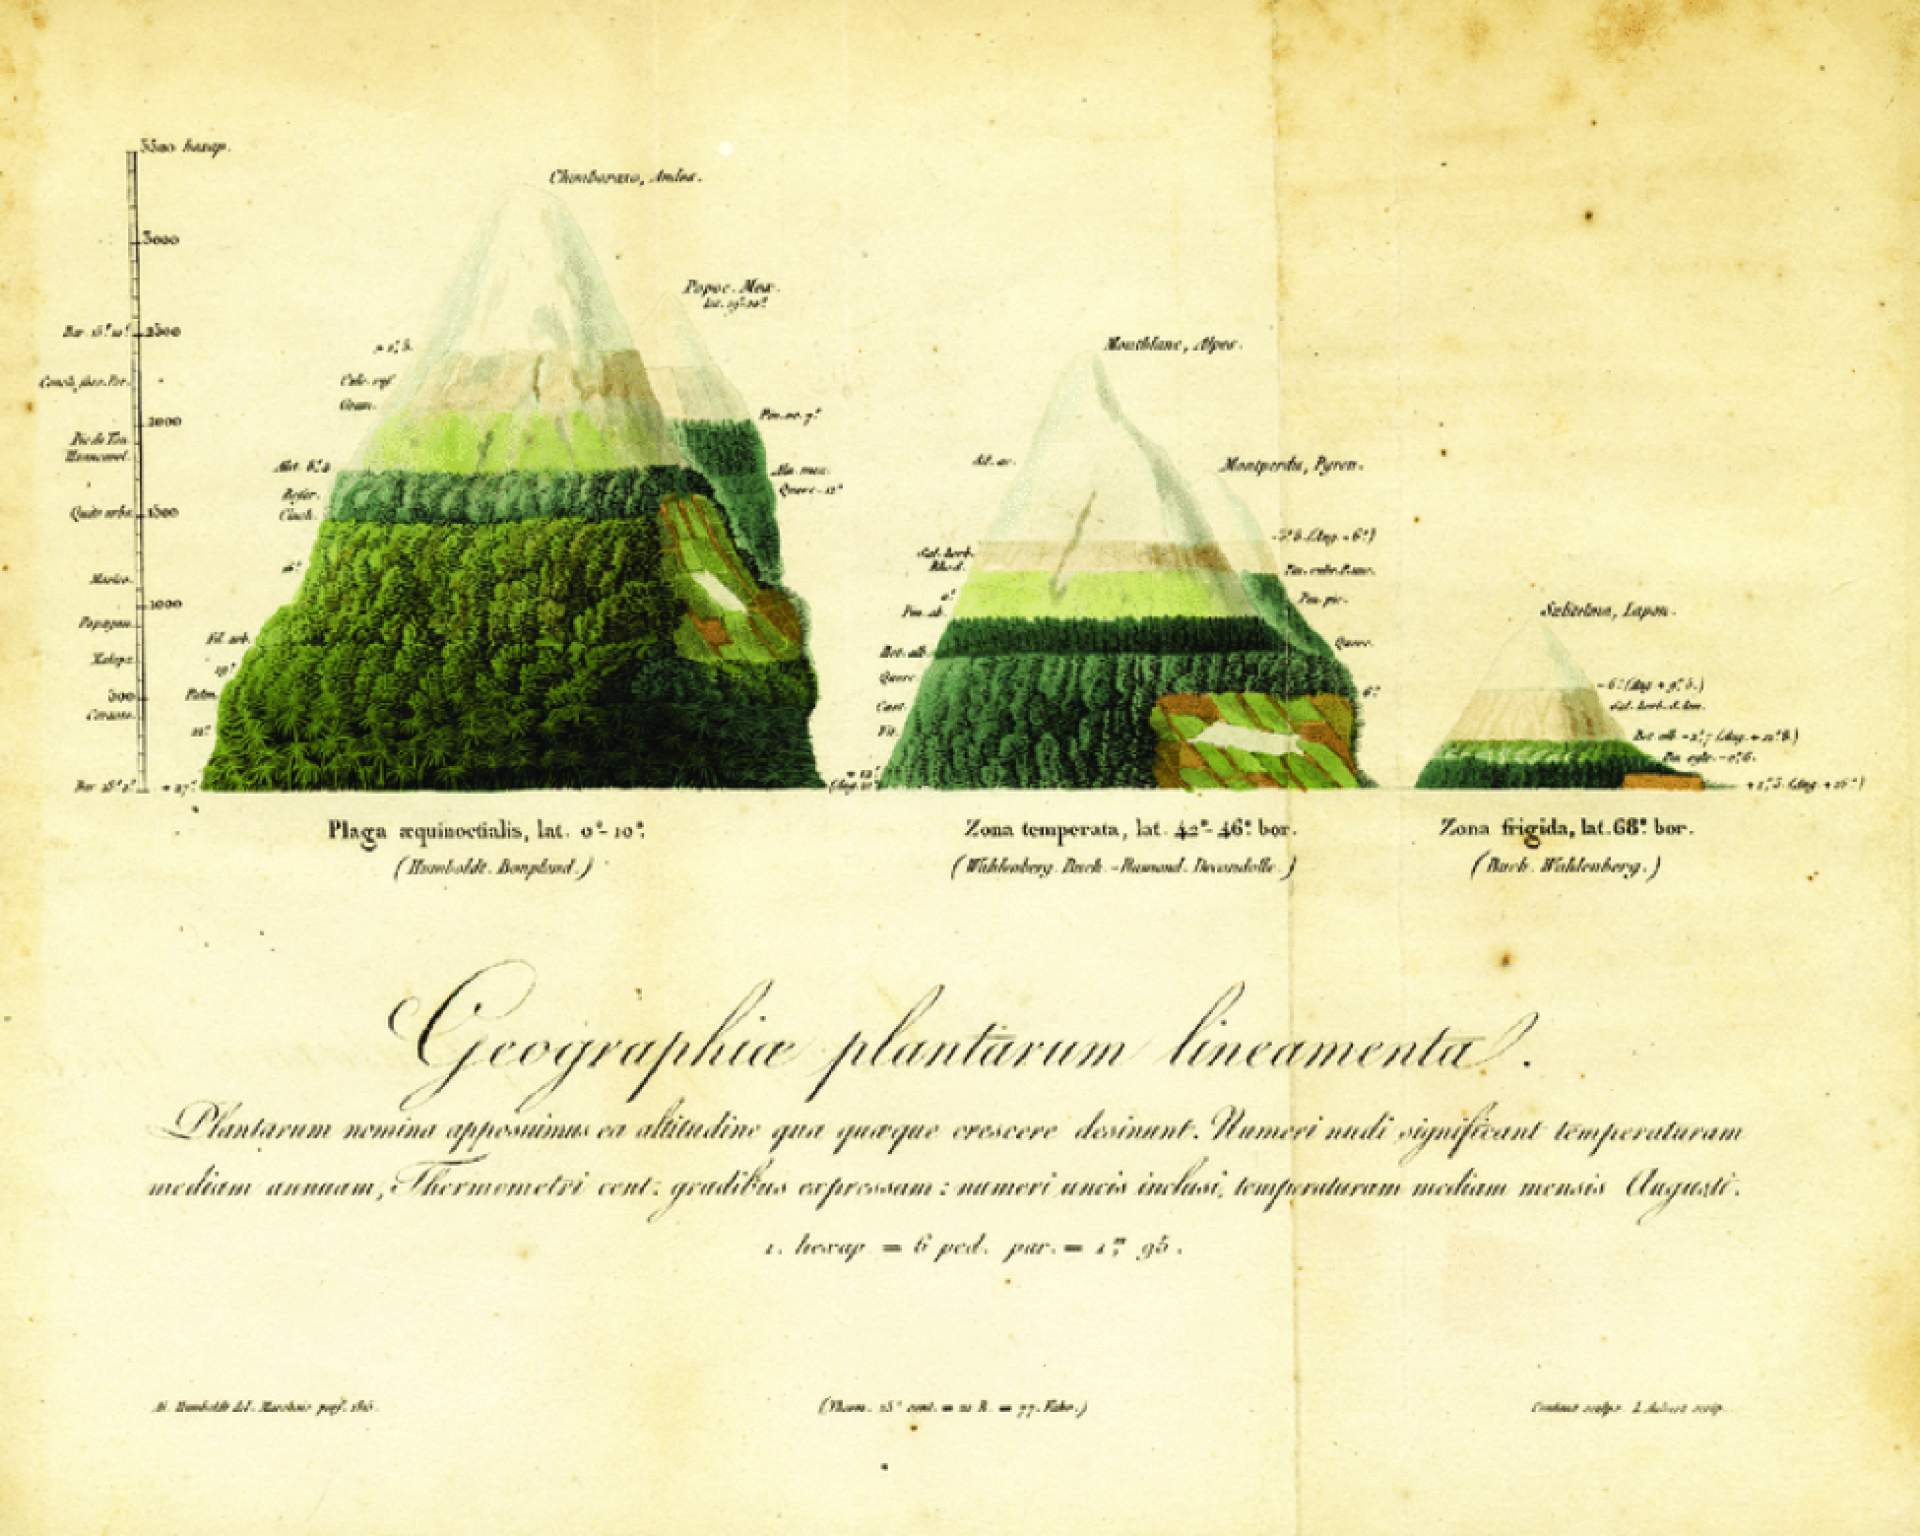 “Lines of the geography of plants,” from On the Distribution of Plants by Alexander von Humboldt, 1817